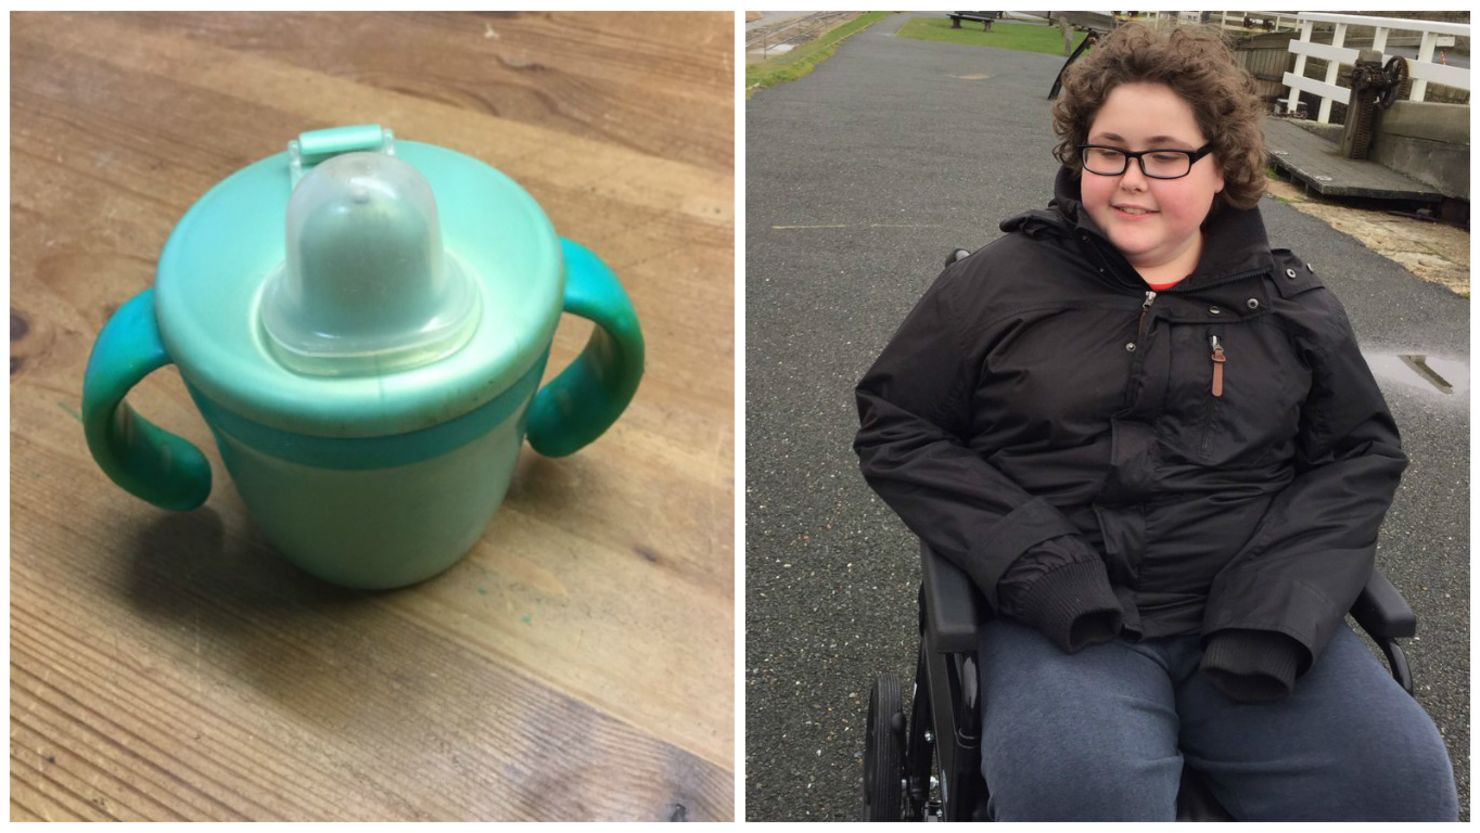 The original Tommee Tippee cup used by autistic boy Ben Carter.